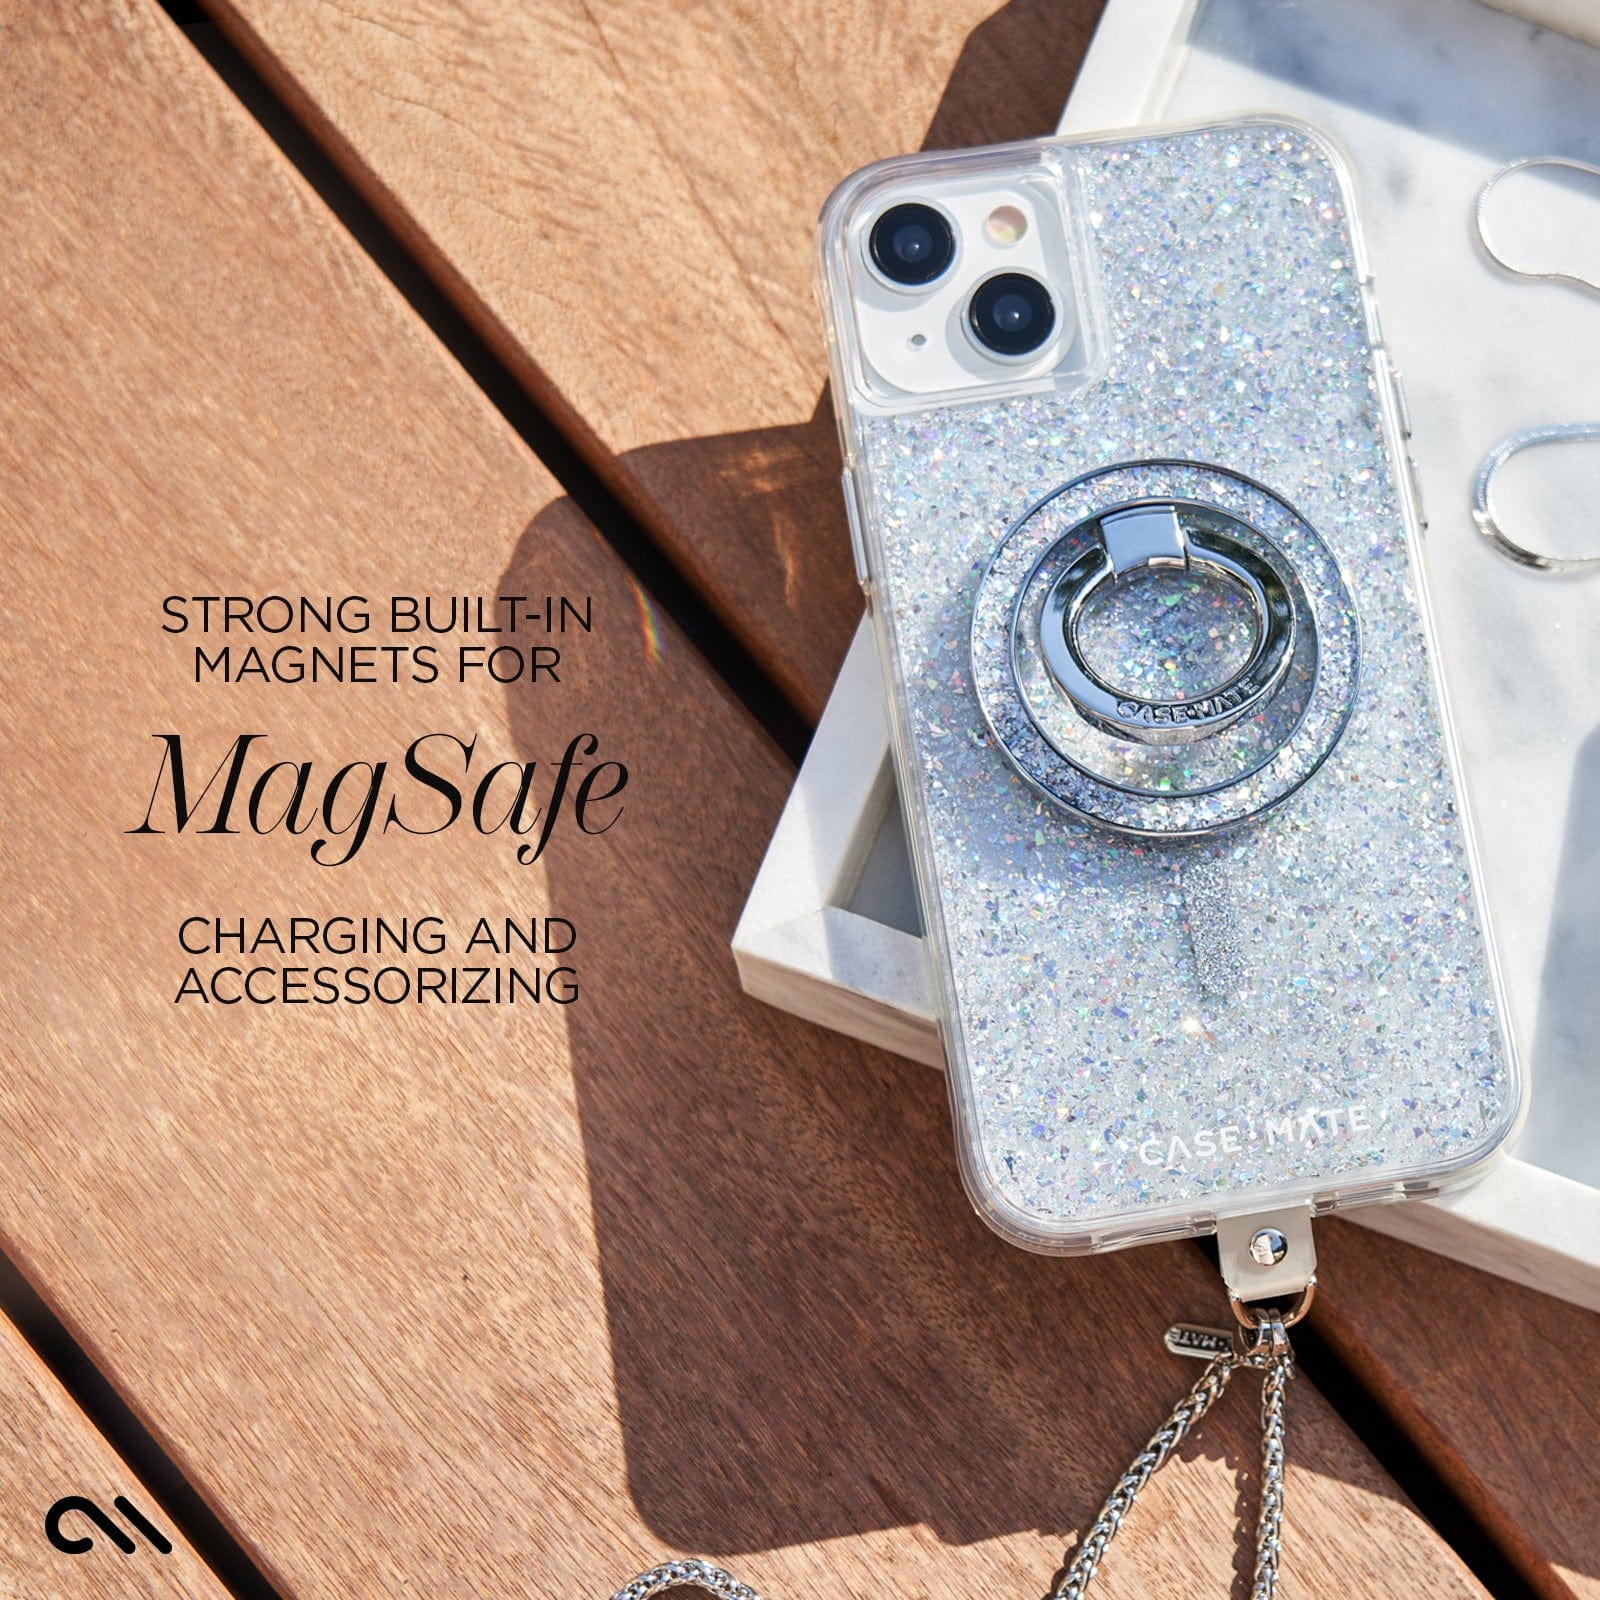 STRONG BUILT-IN MAGNETS FOR MAGSAFE CHARGING AND ACCESORIZING